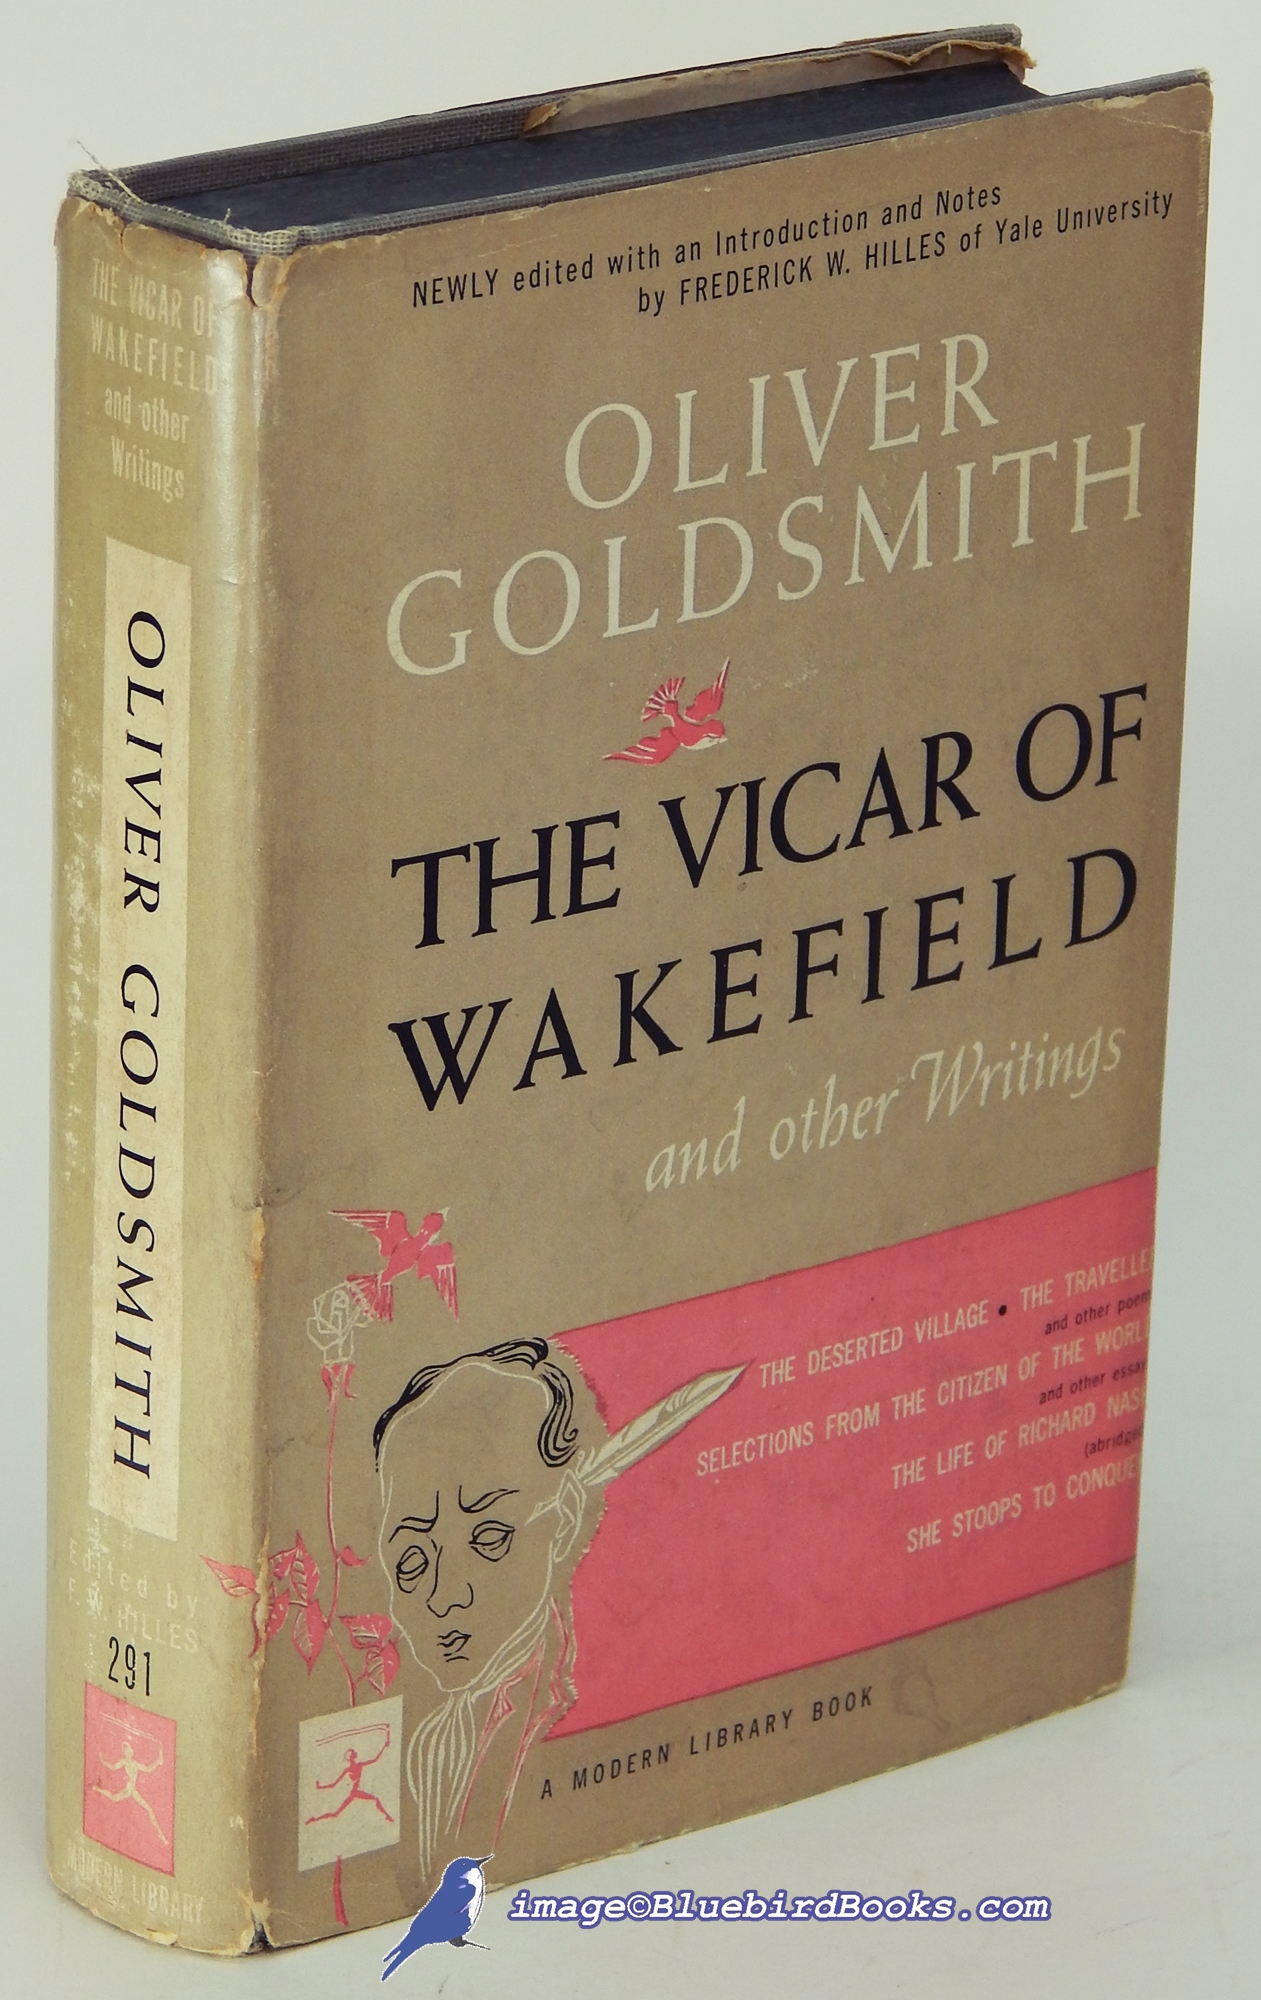 GOLDSMITH, OLIVER - The Vicar of Wakefield and Other Writings (Modern Library #291. 1)